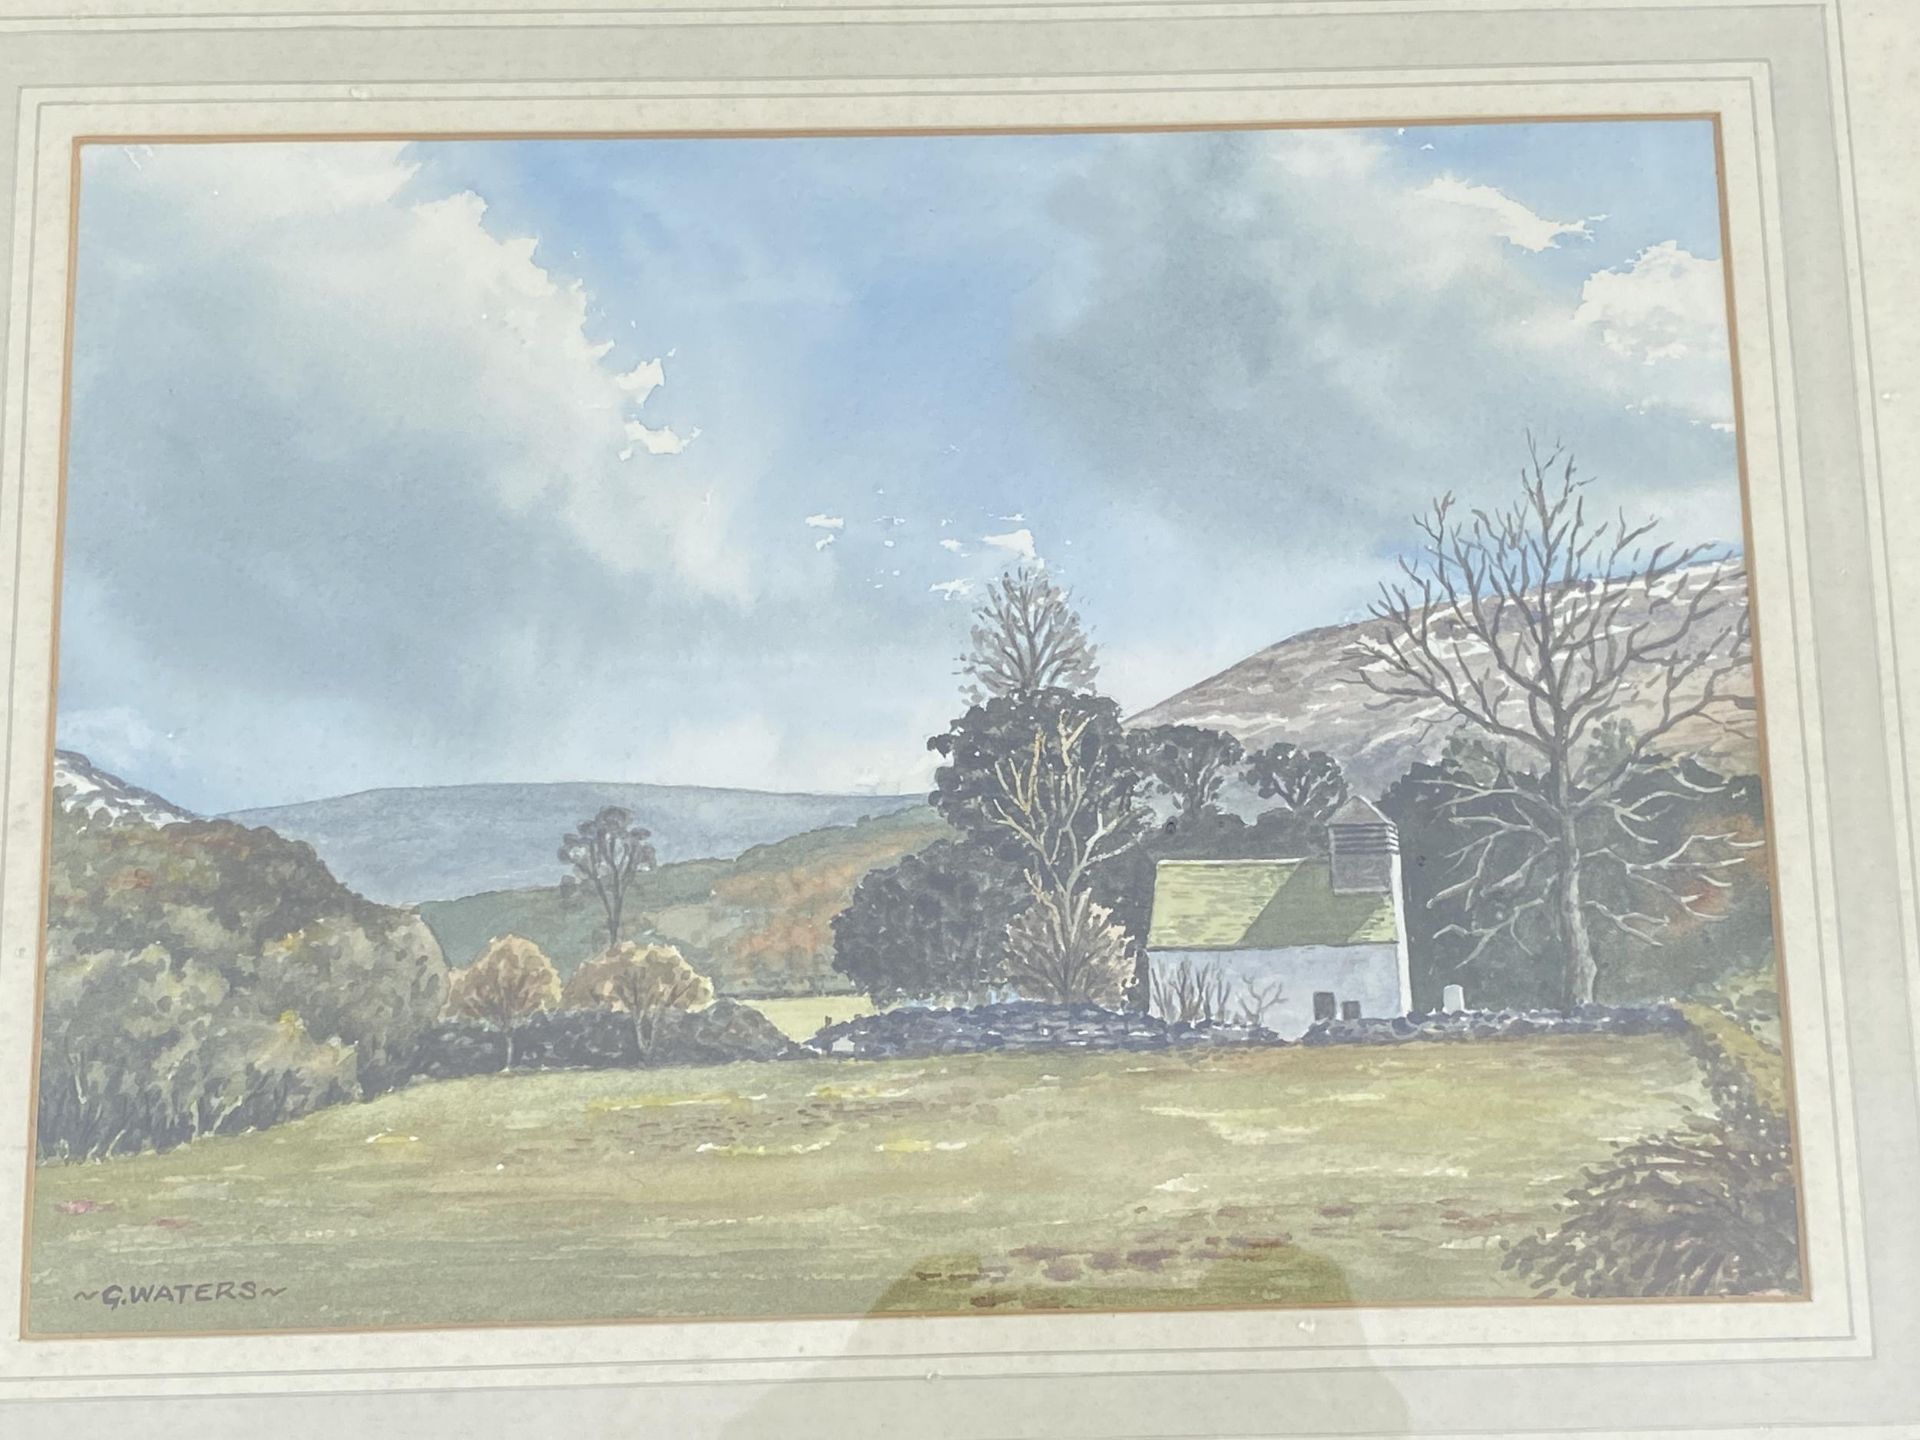 A FRAMED G.WATERS WATERCOLOUR OF CAPEL-Y-FFIN - Image 2 of 4